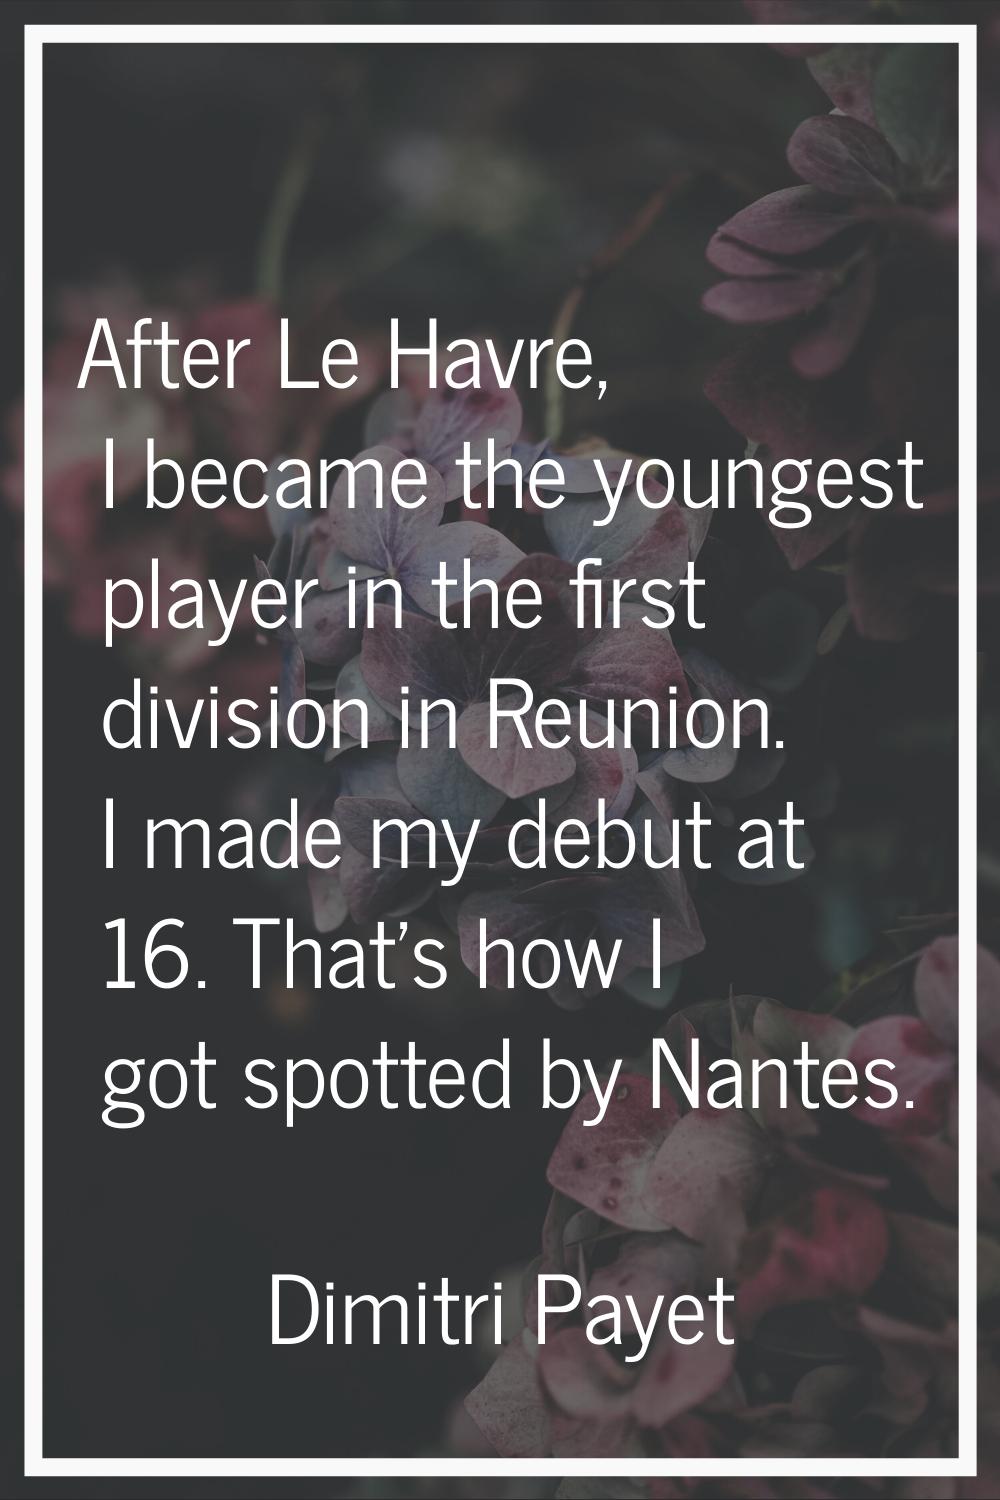 After Le Havre, I became the youngest player in the first division in Reunion. I made my debut at 1